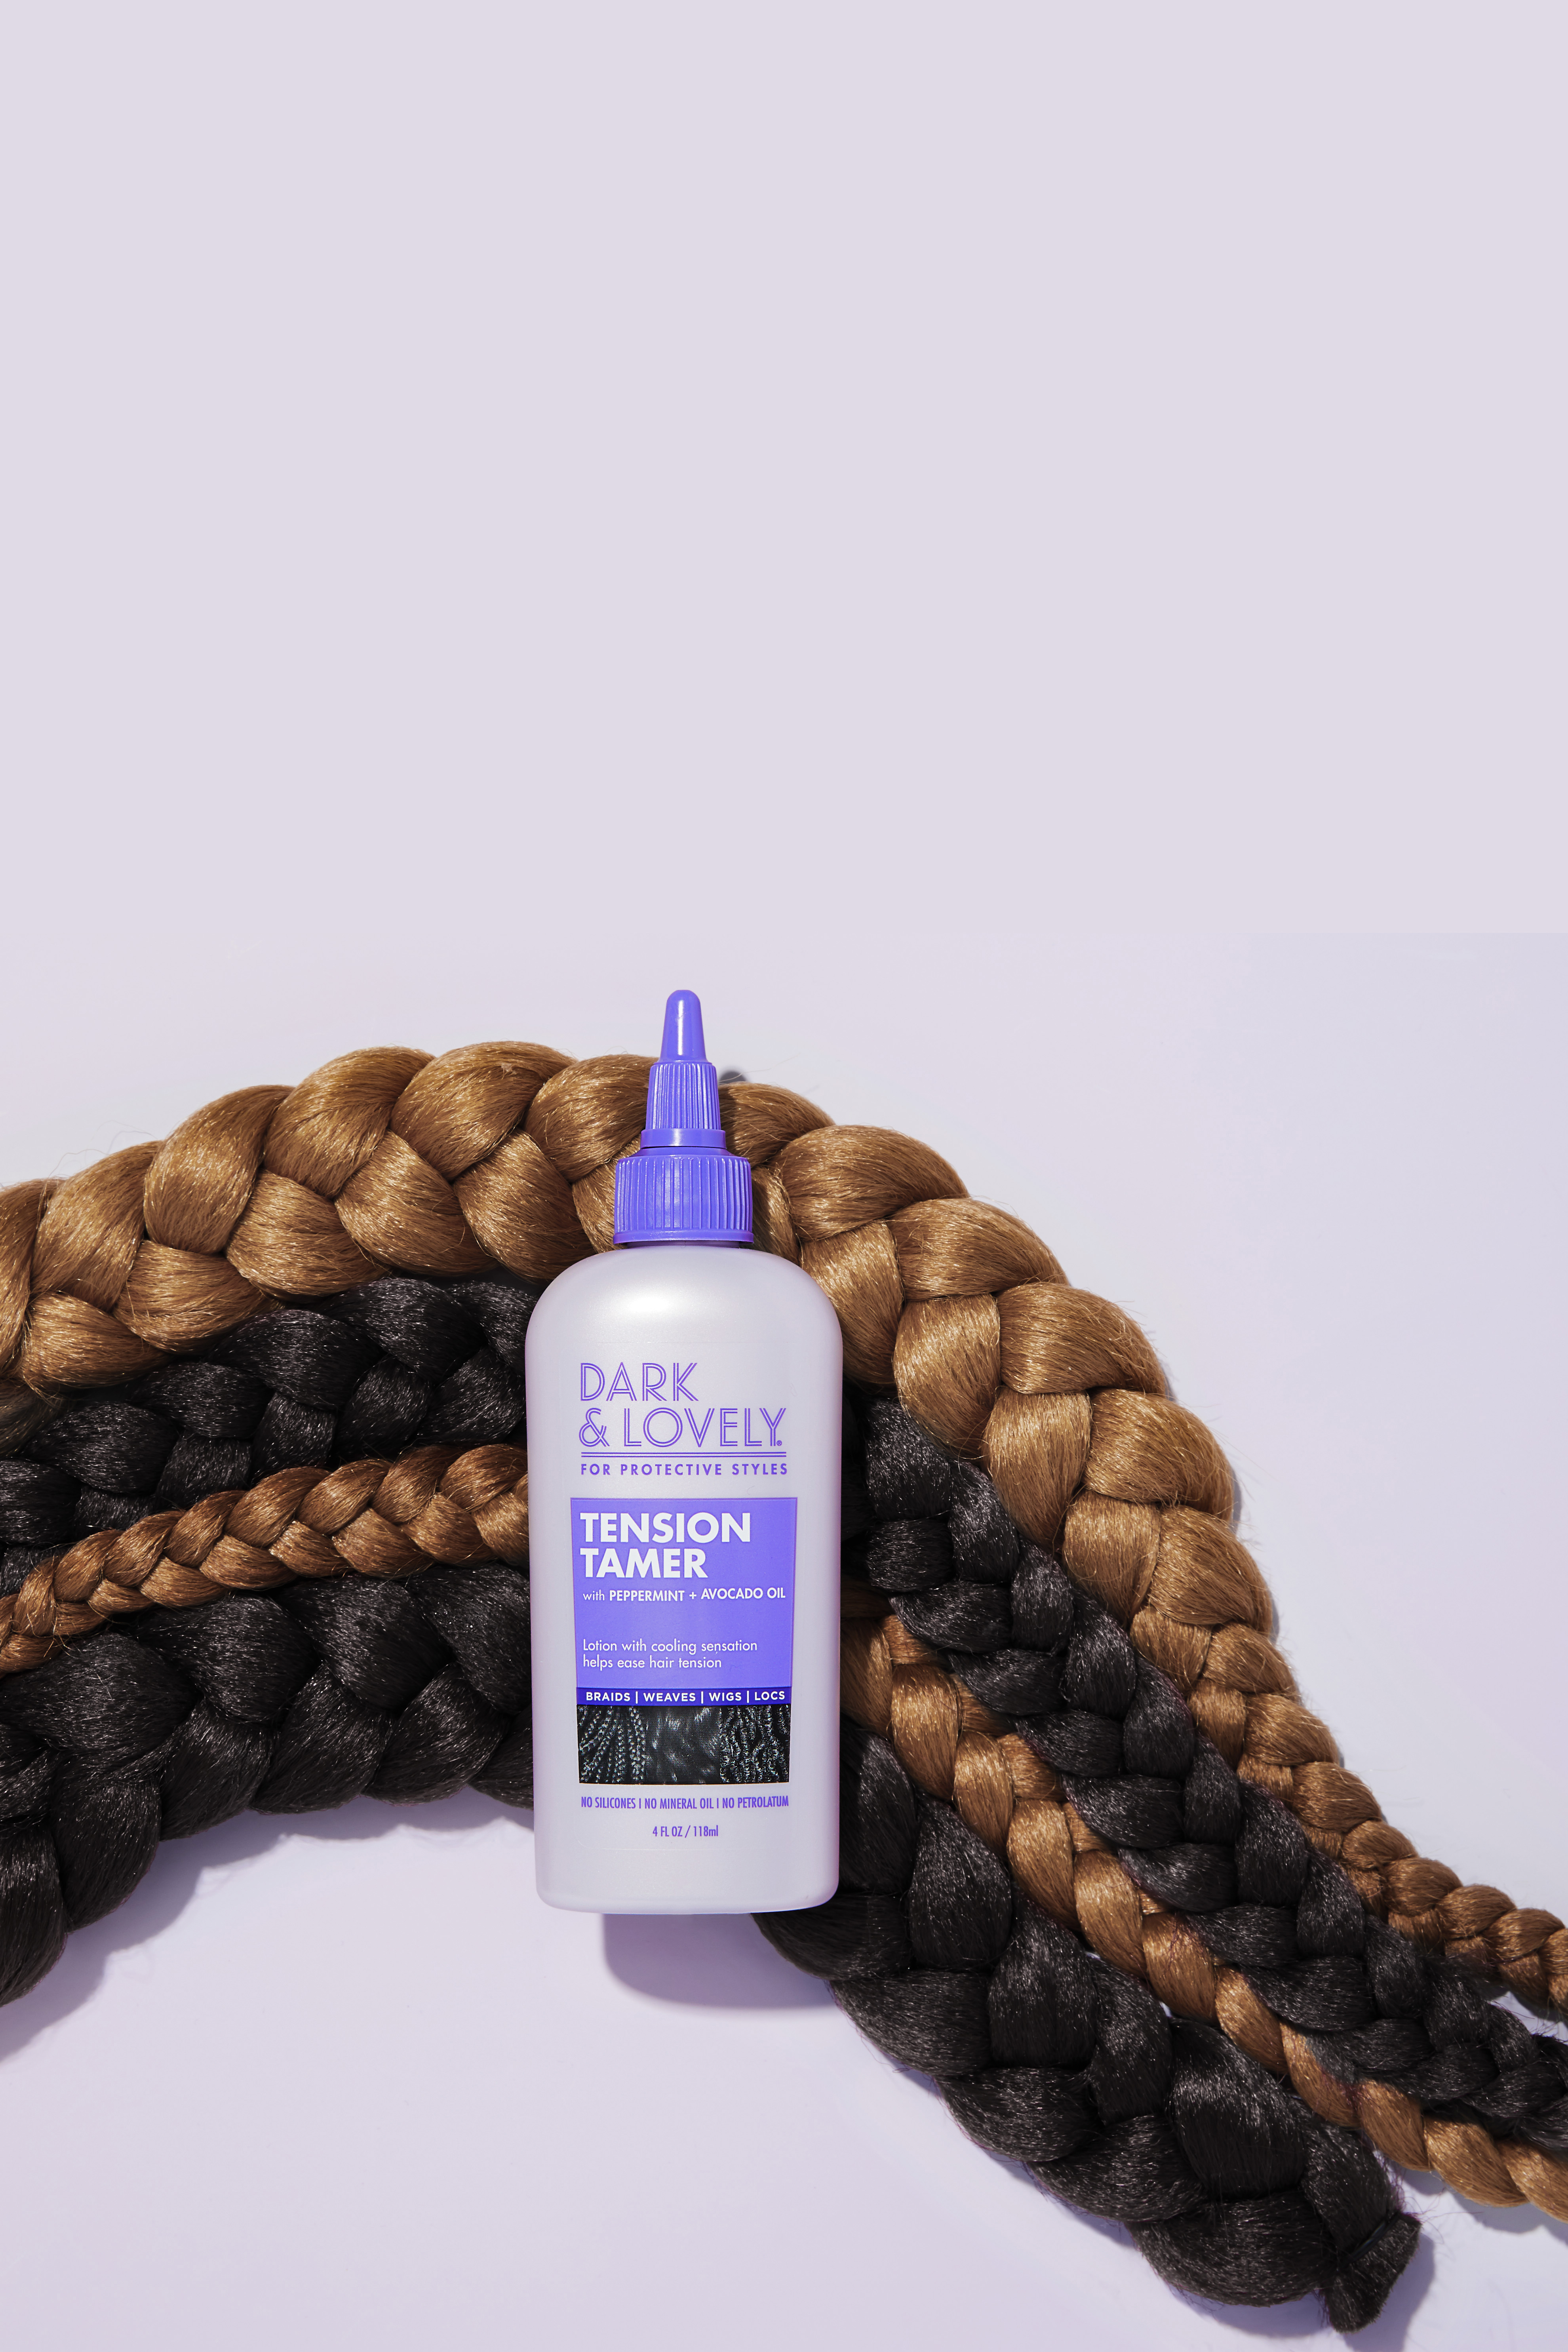 Dark and Lovely Tension Tamer For Protective Styles, 4 fl oz - image 4 of 8